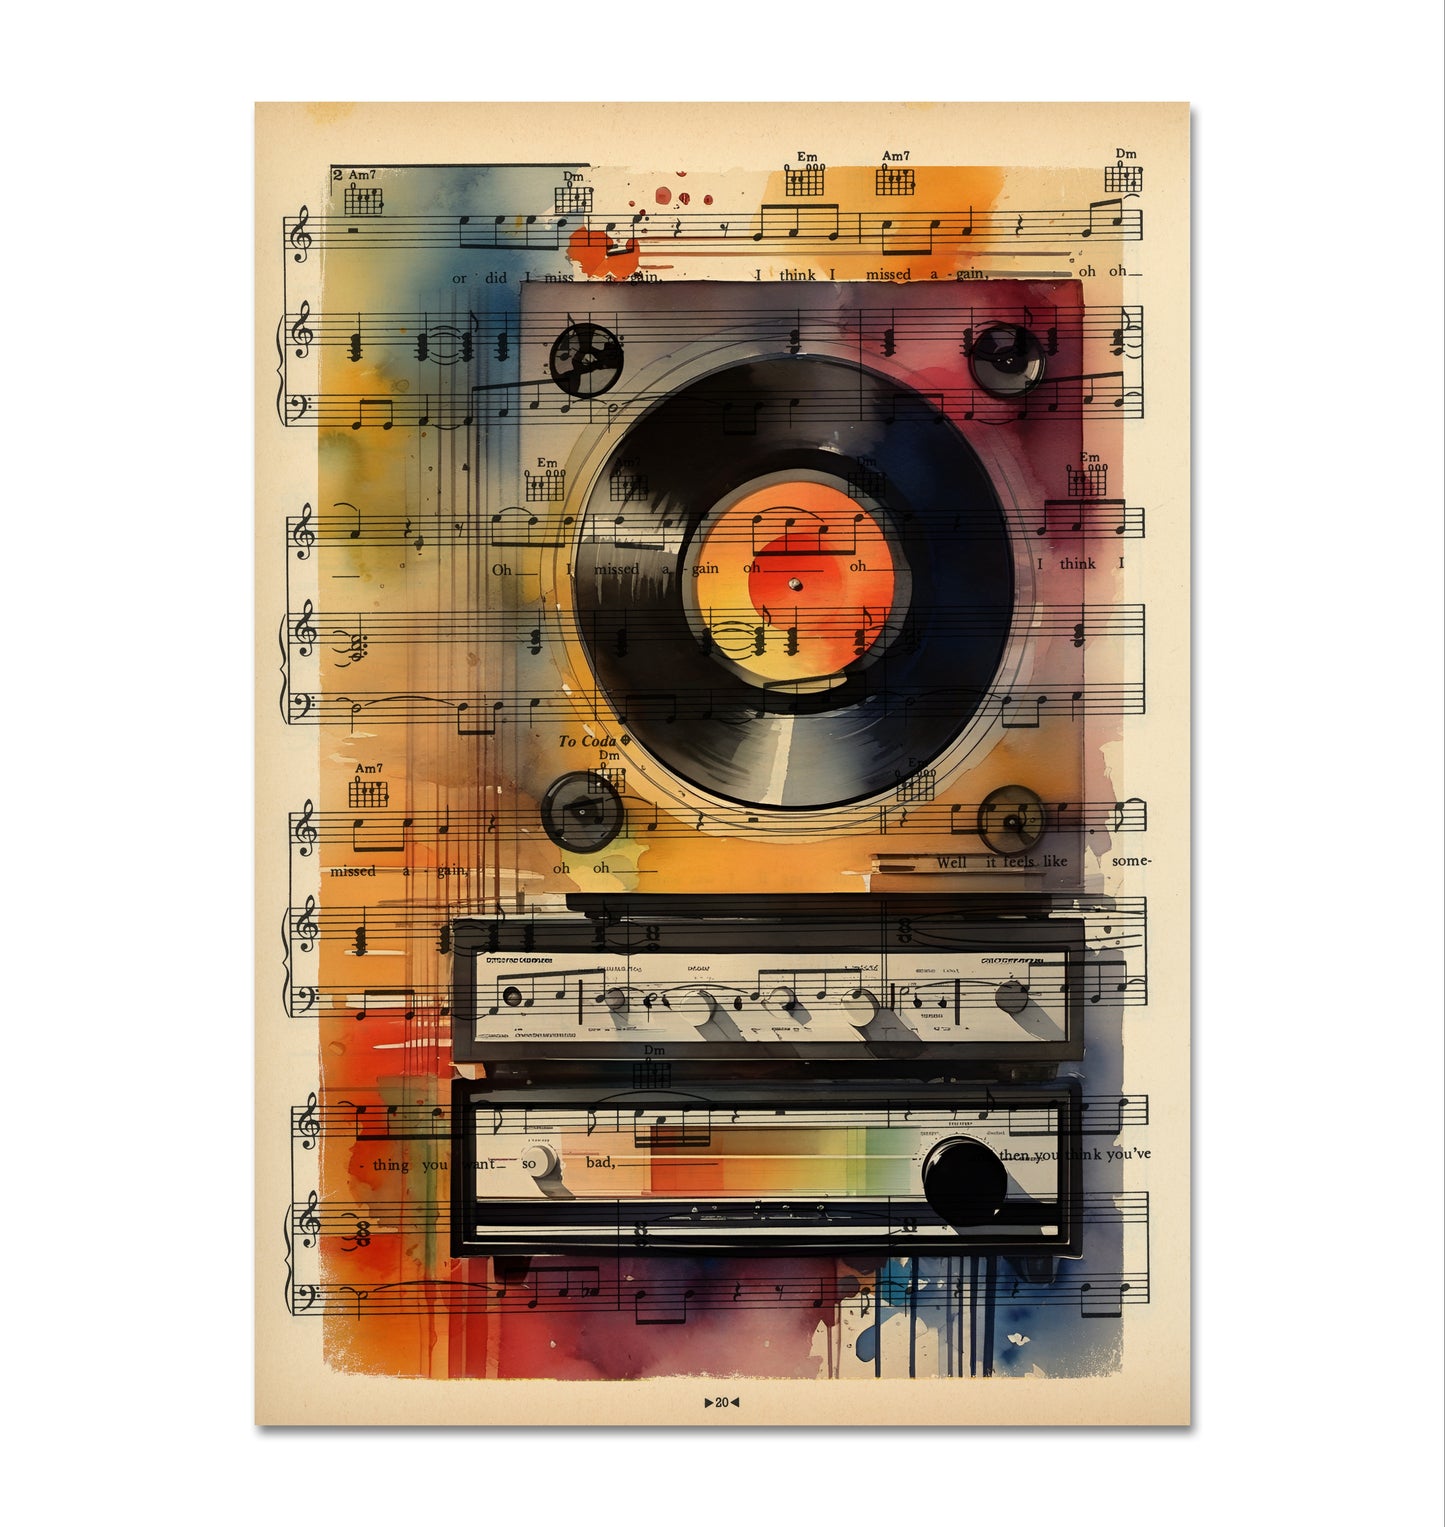 "Artistic Homage to Cassette Tapes and Synthesizers"